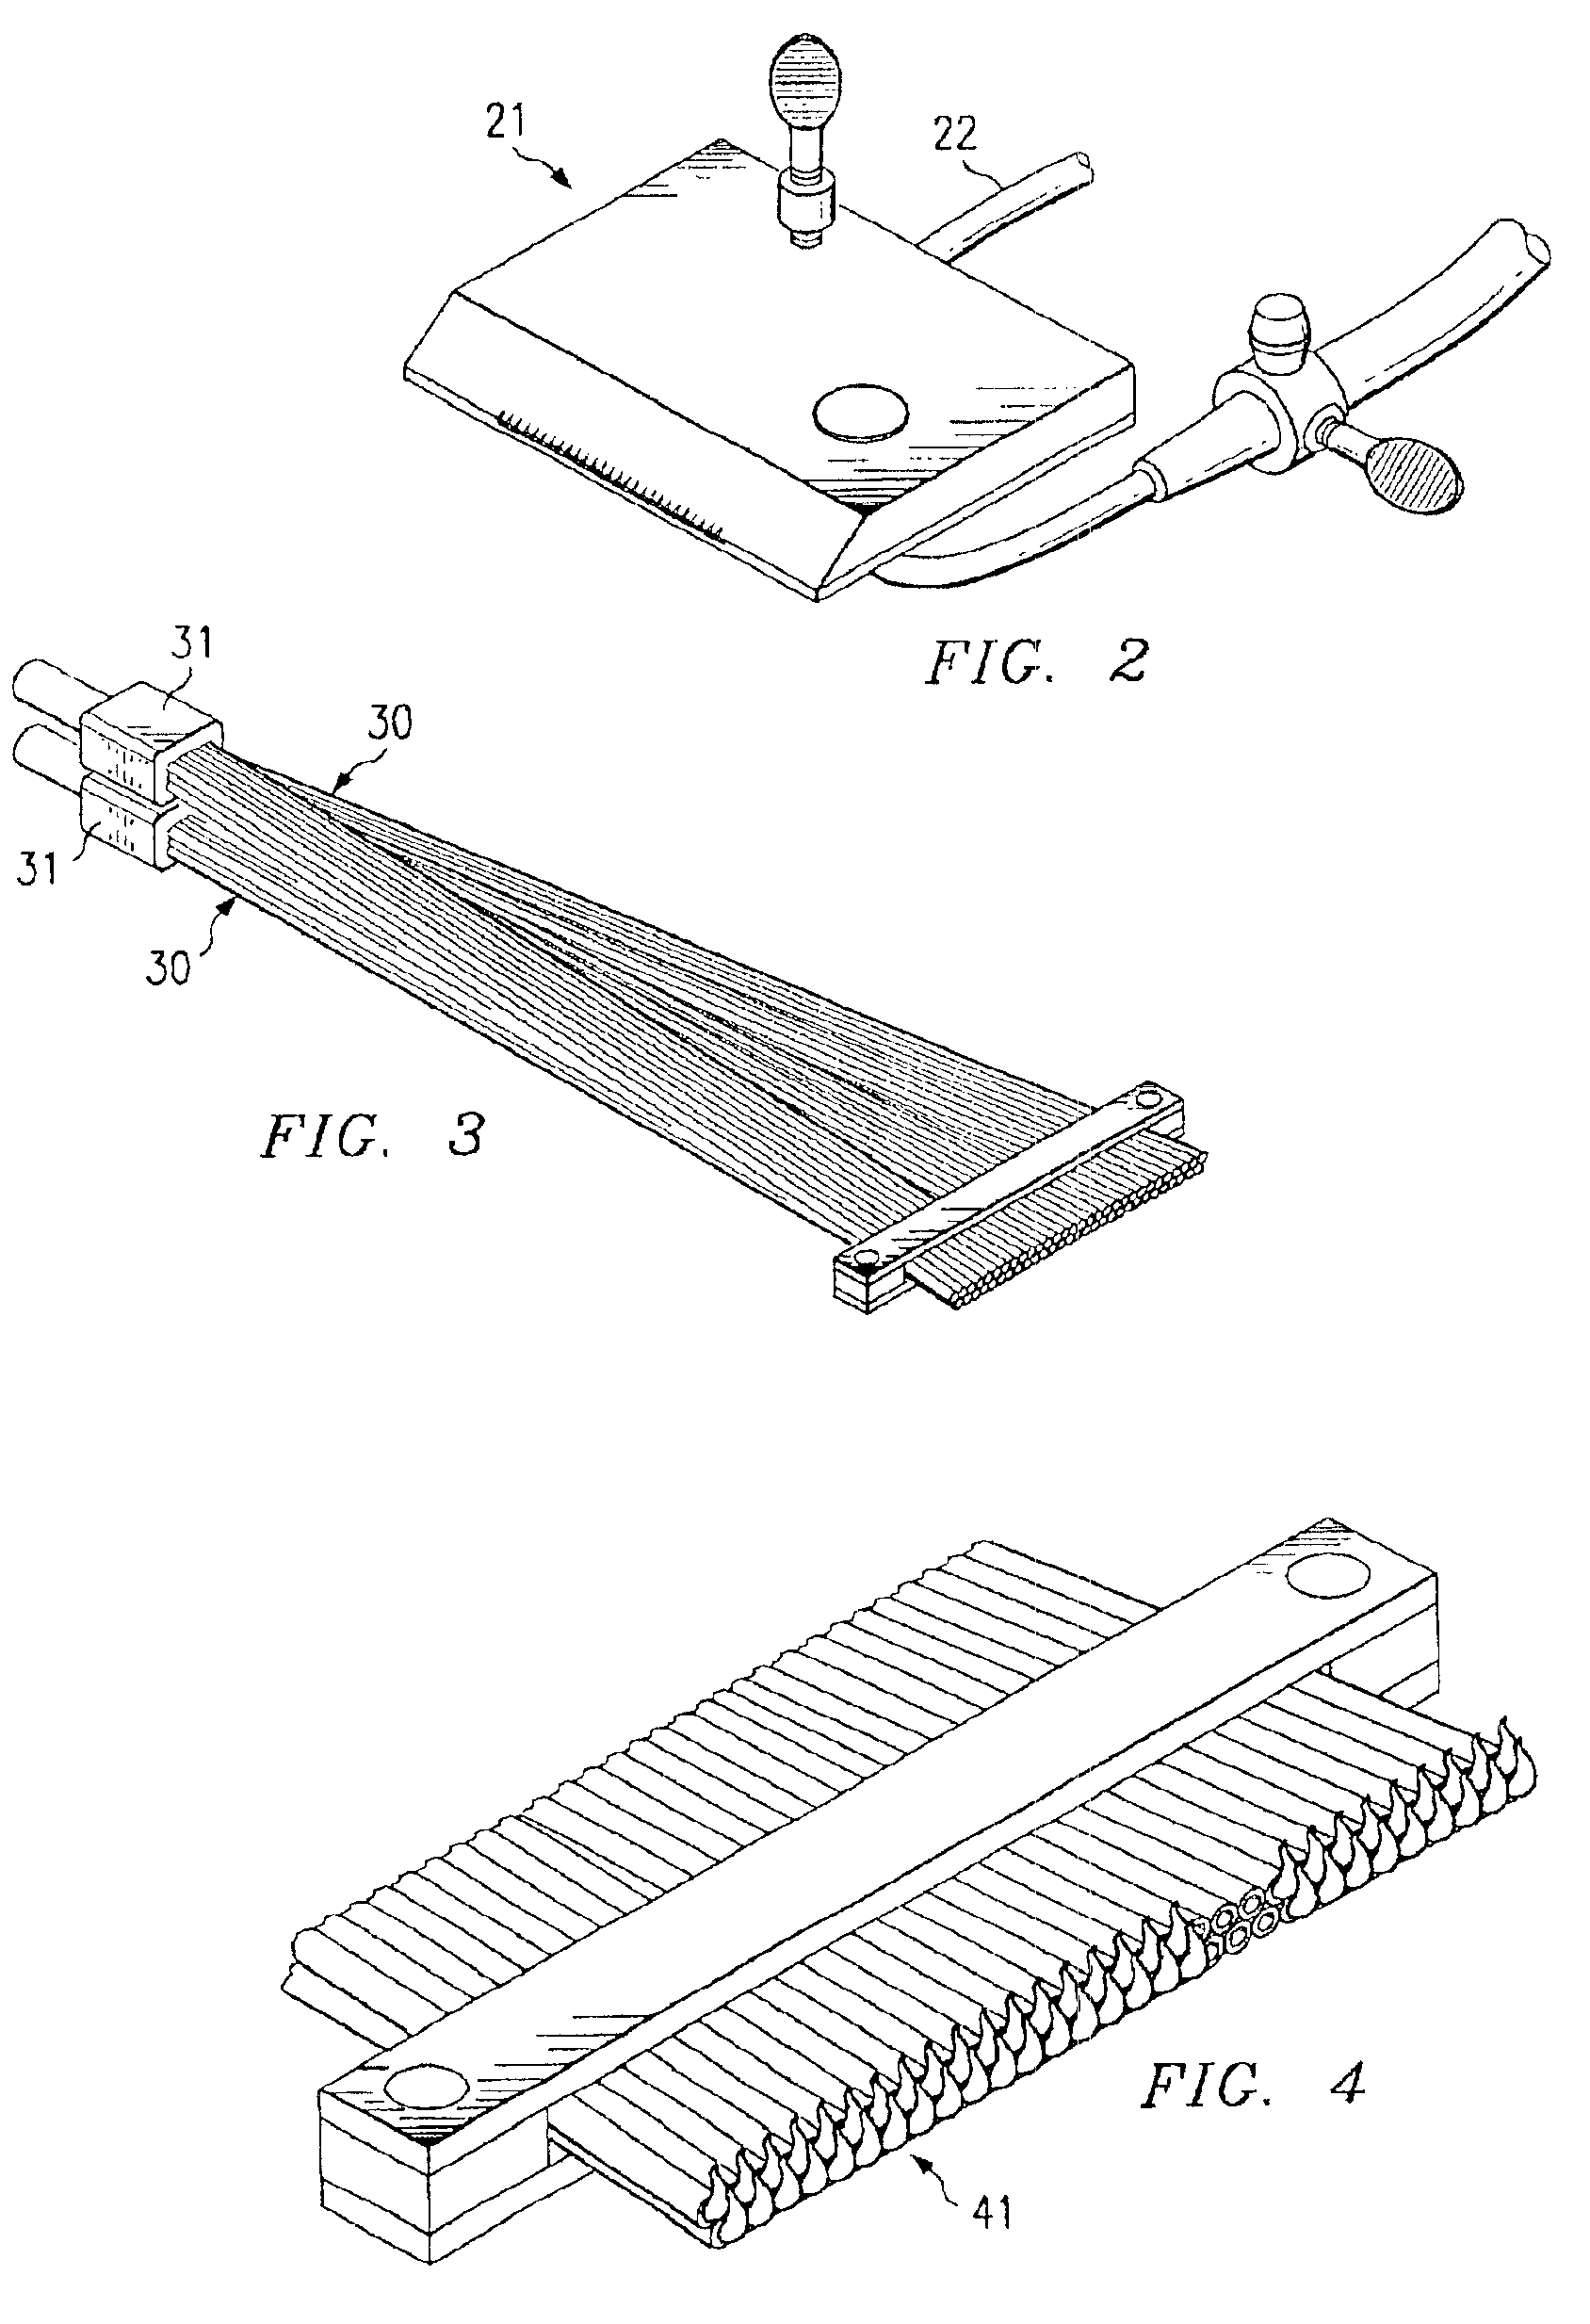 Method for controlled surface scratch removal and glass resurfacing